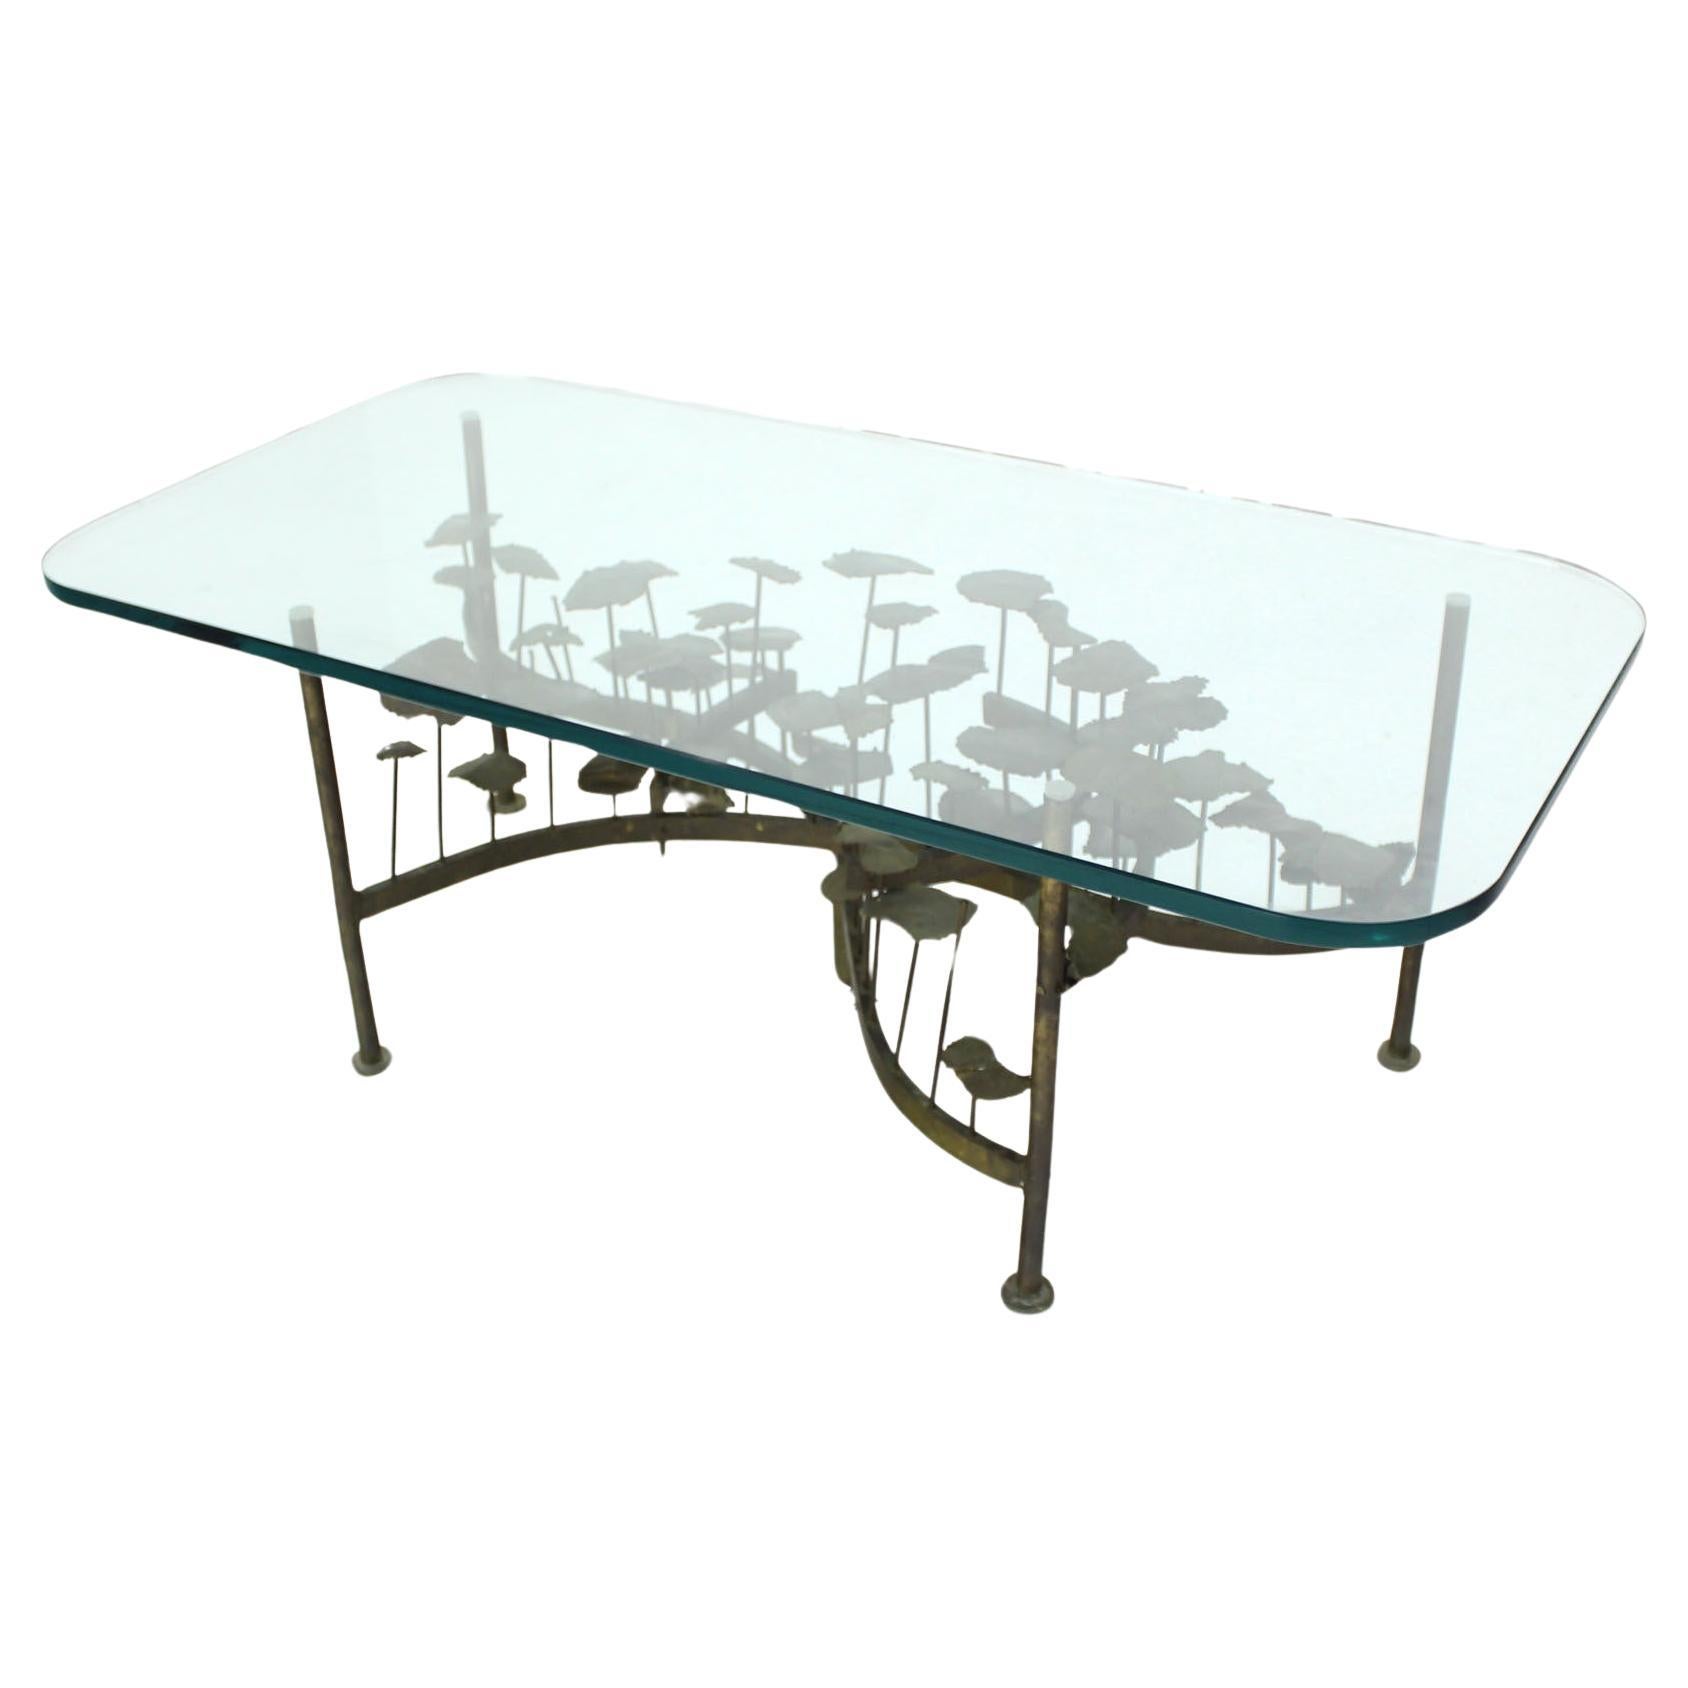 Silas Seandel Mid Century Modern Brass Base Glass Top Brutalist Coffee Table  For Sale